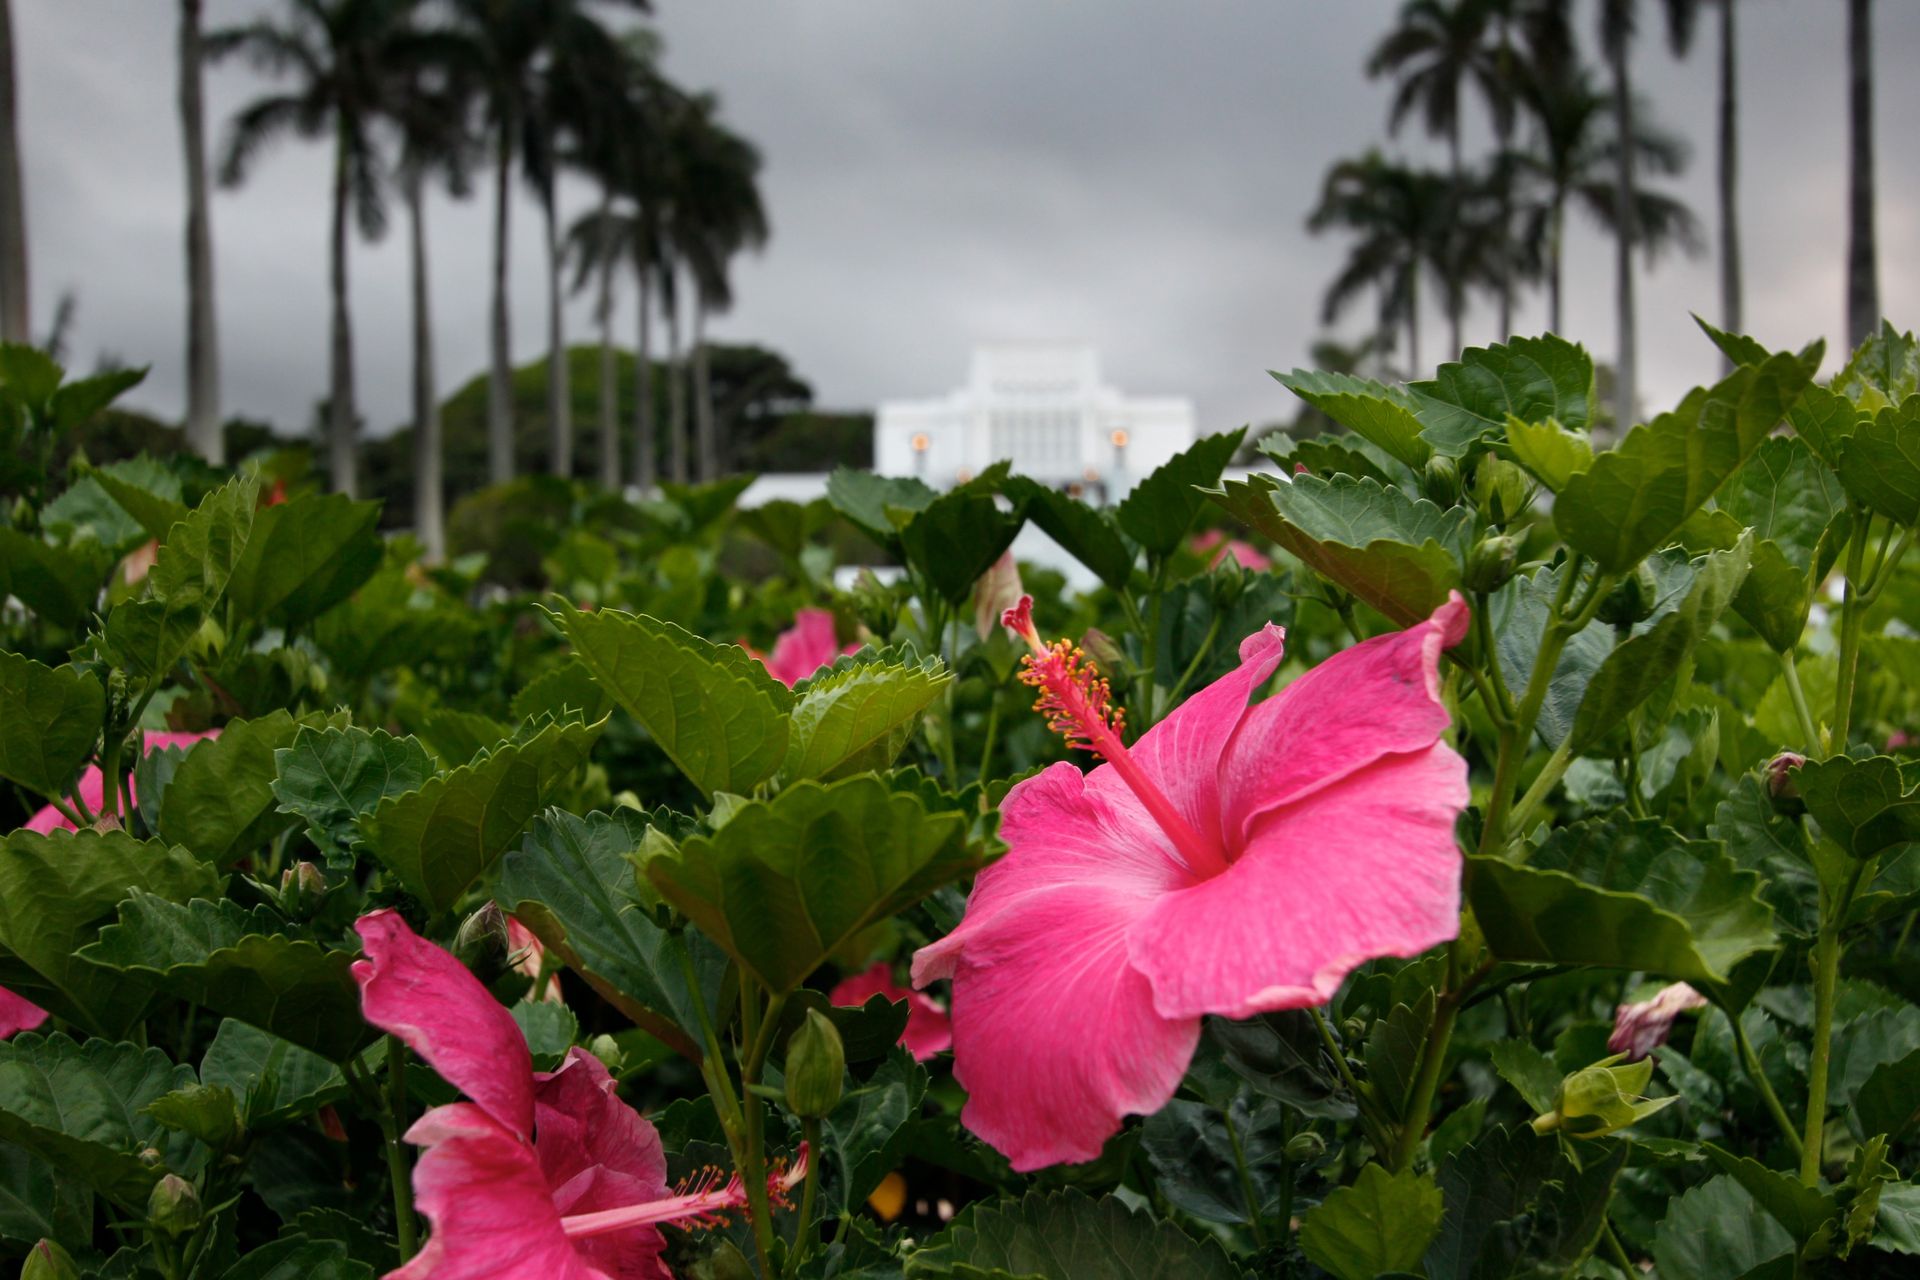 Flowers in front of the Laie Hawaii Temple.